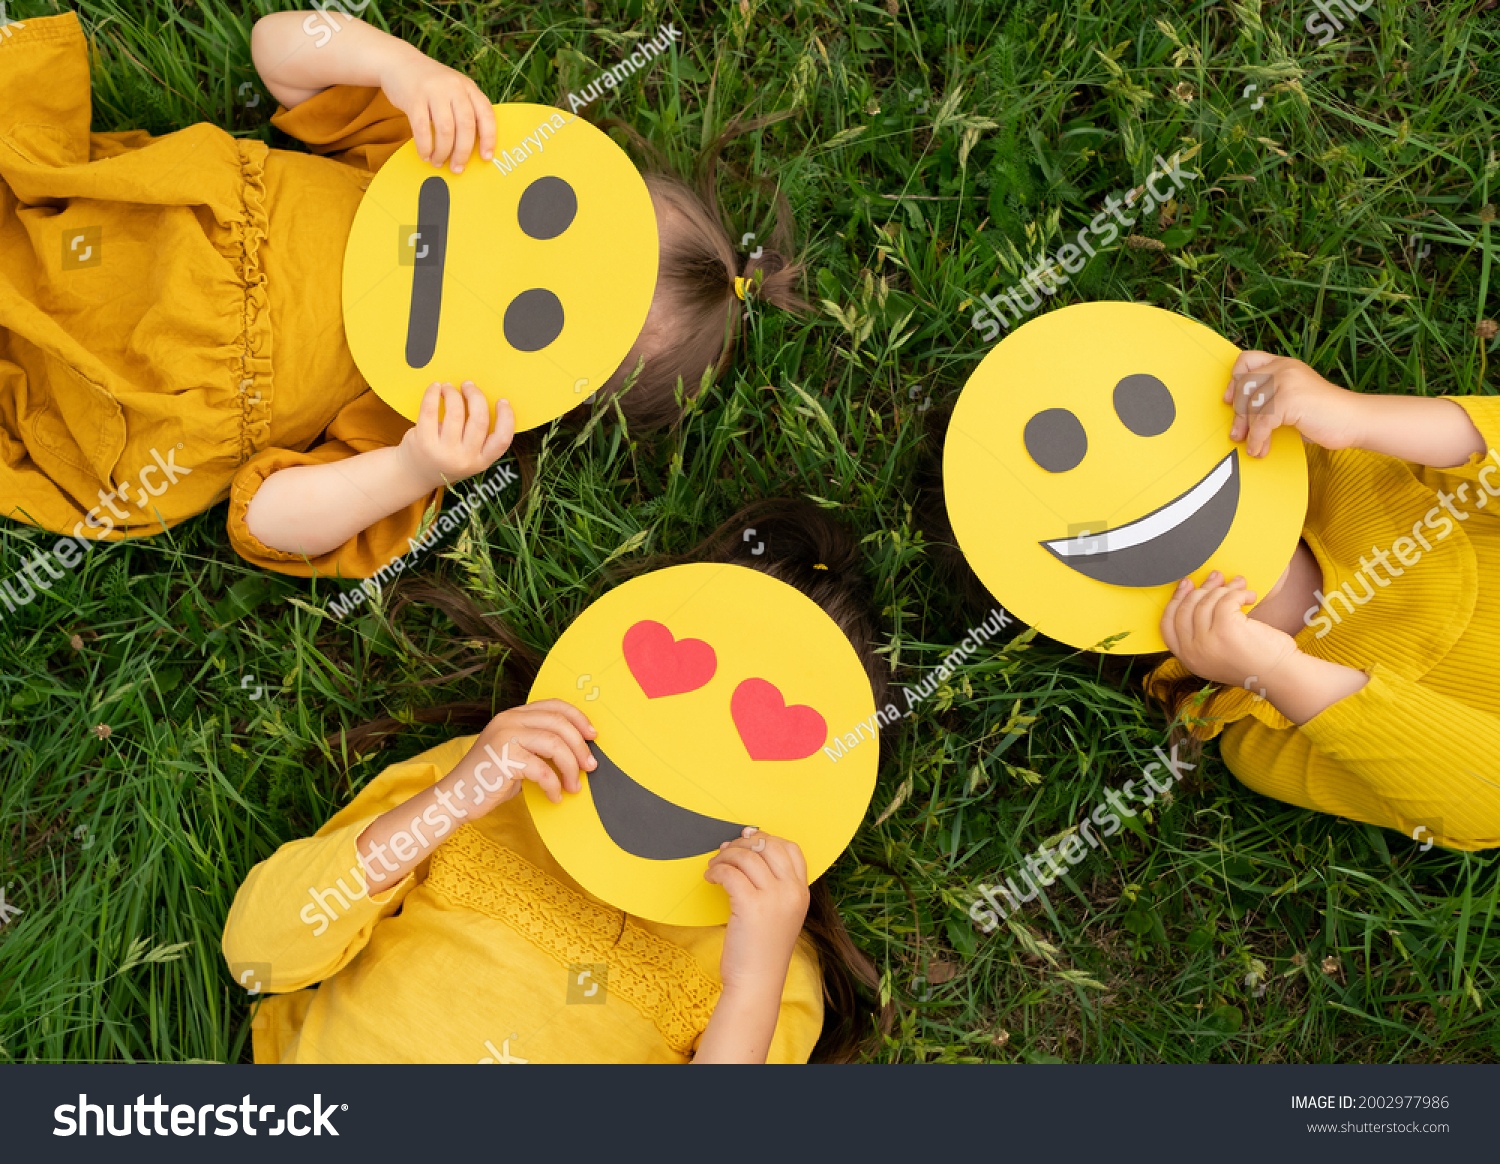 Three children lying on the grass are holding cardboard emoticons with different emotions in their hands: a sad, smiling happy smile, a loving smile with hearts instead of eyes.  World Emoji Day #2002977986